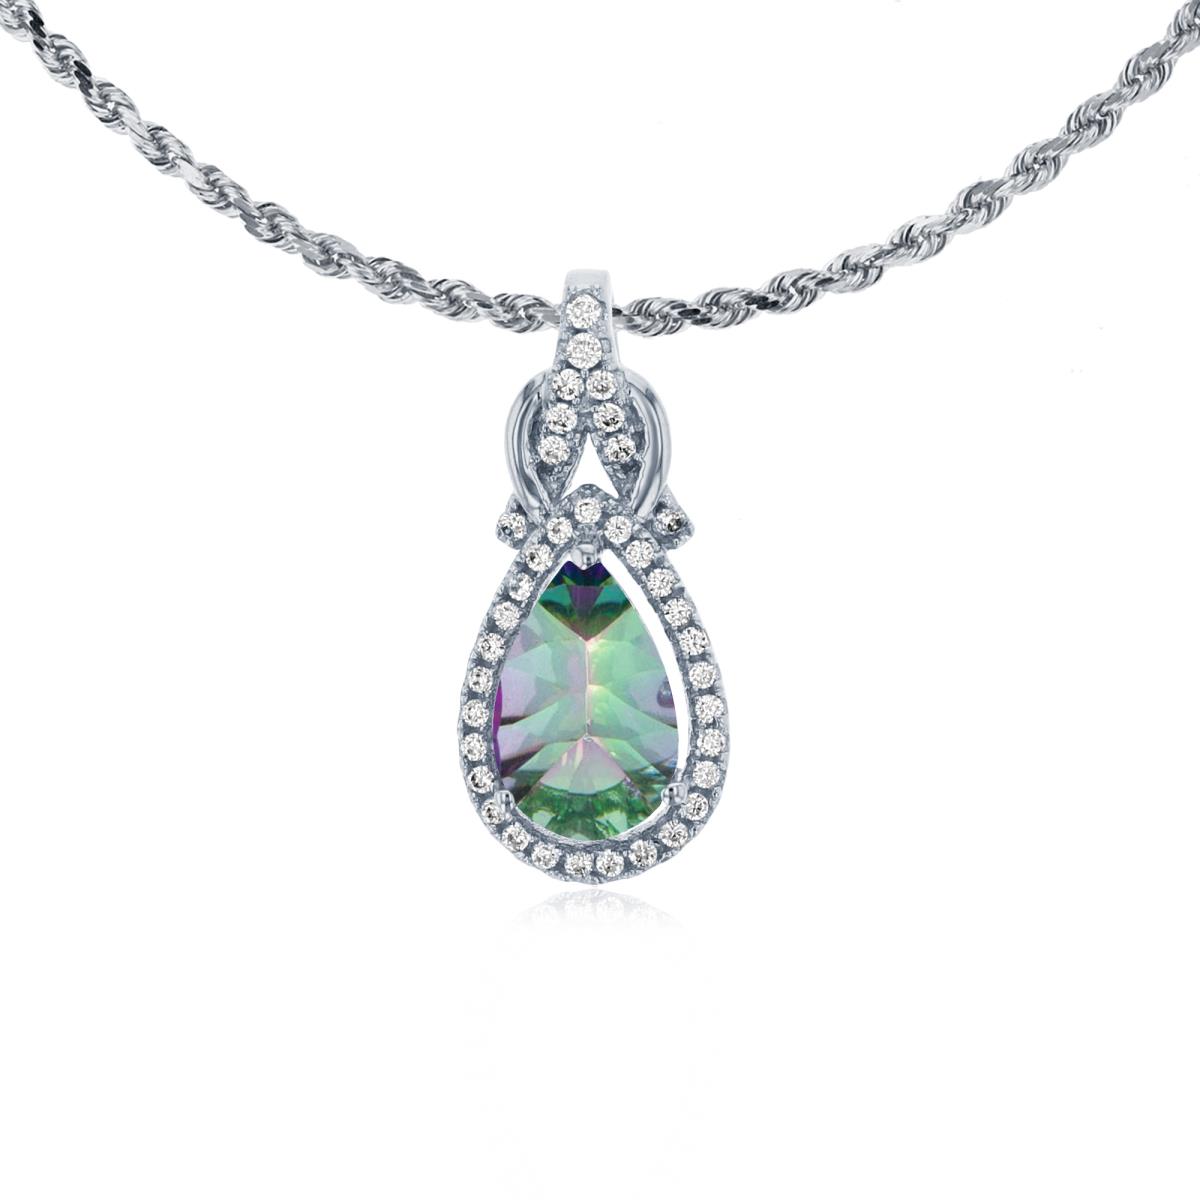 10K White Gold 8x5mm Pear Cut Mystic Green Topaz & 0.11 CTTW Rnd Diamond Knot 18" Rope Chain Necklace